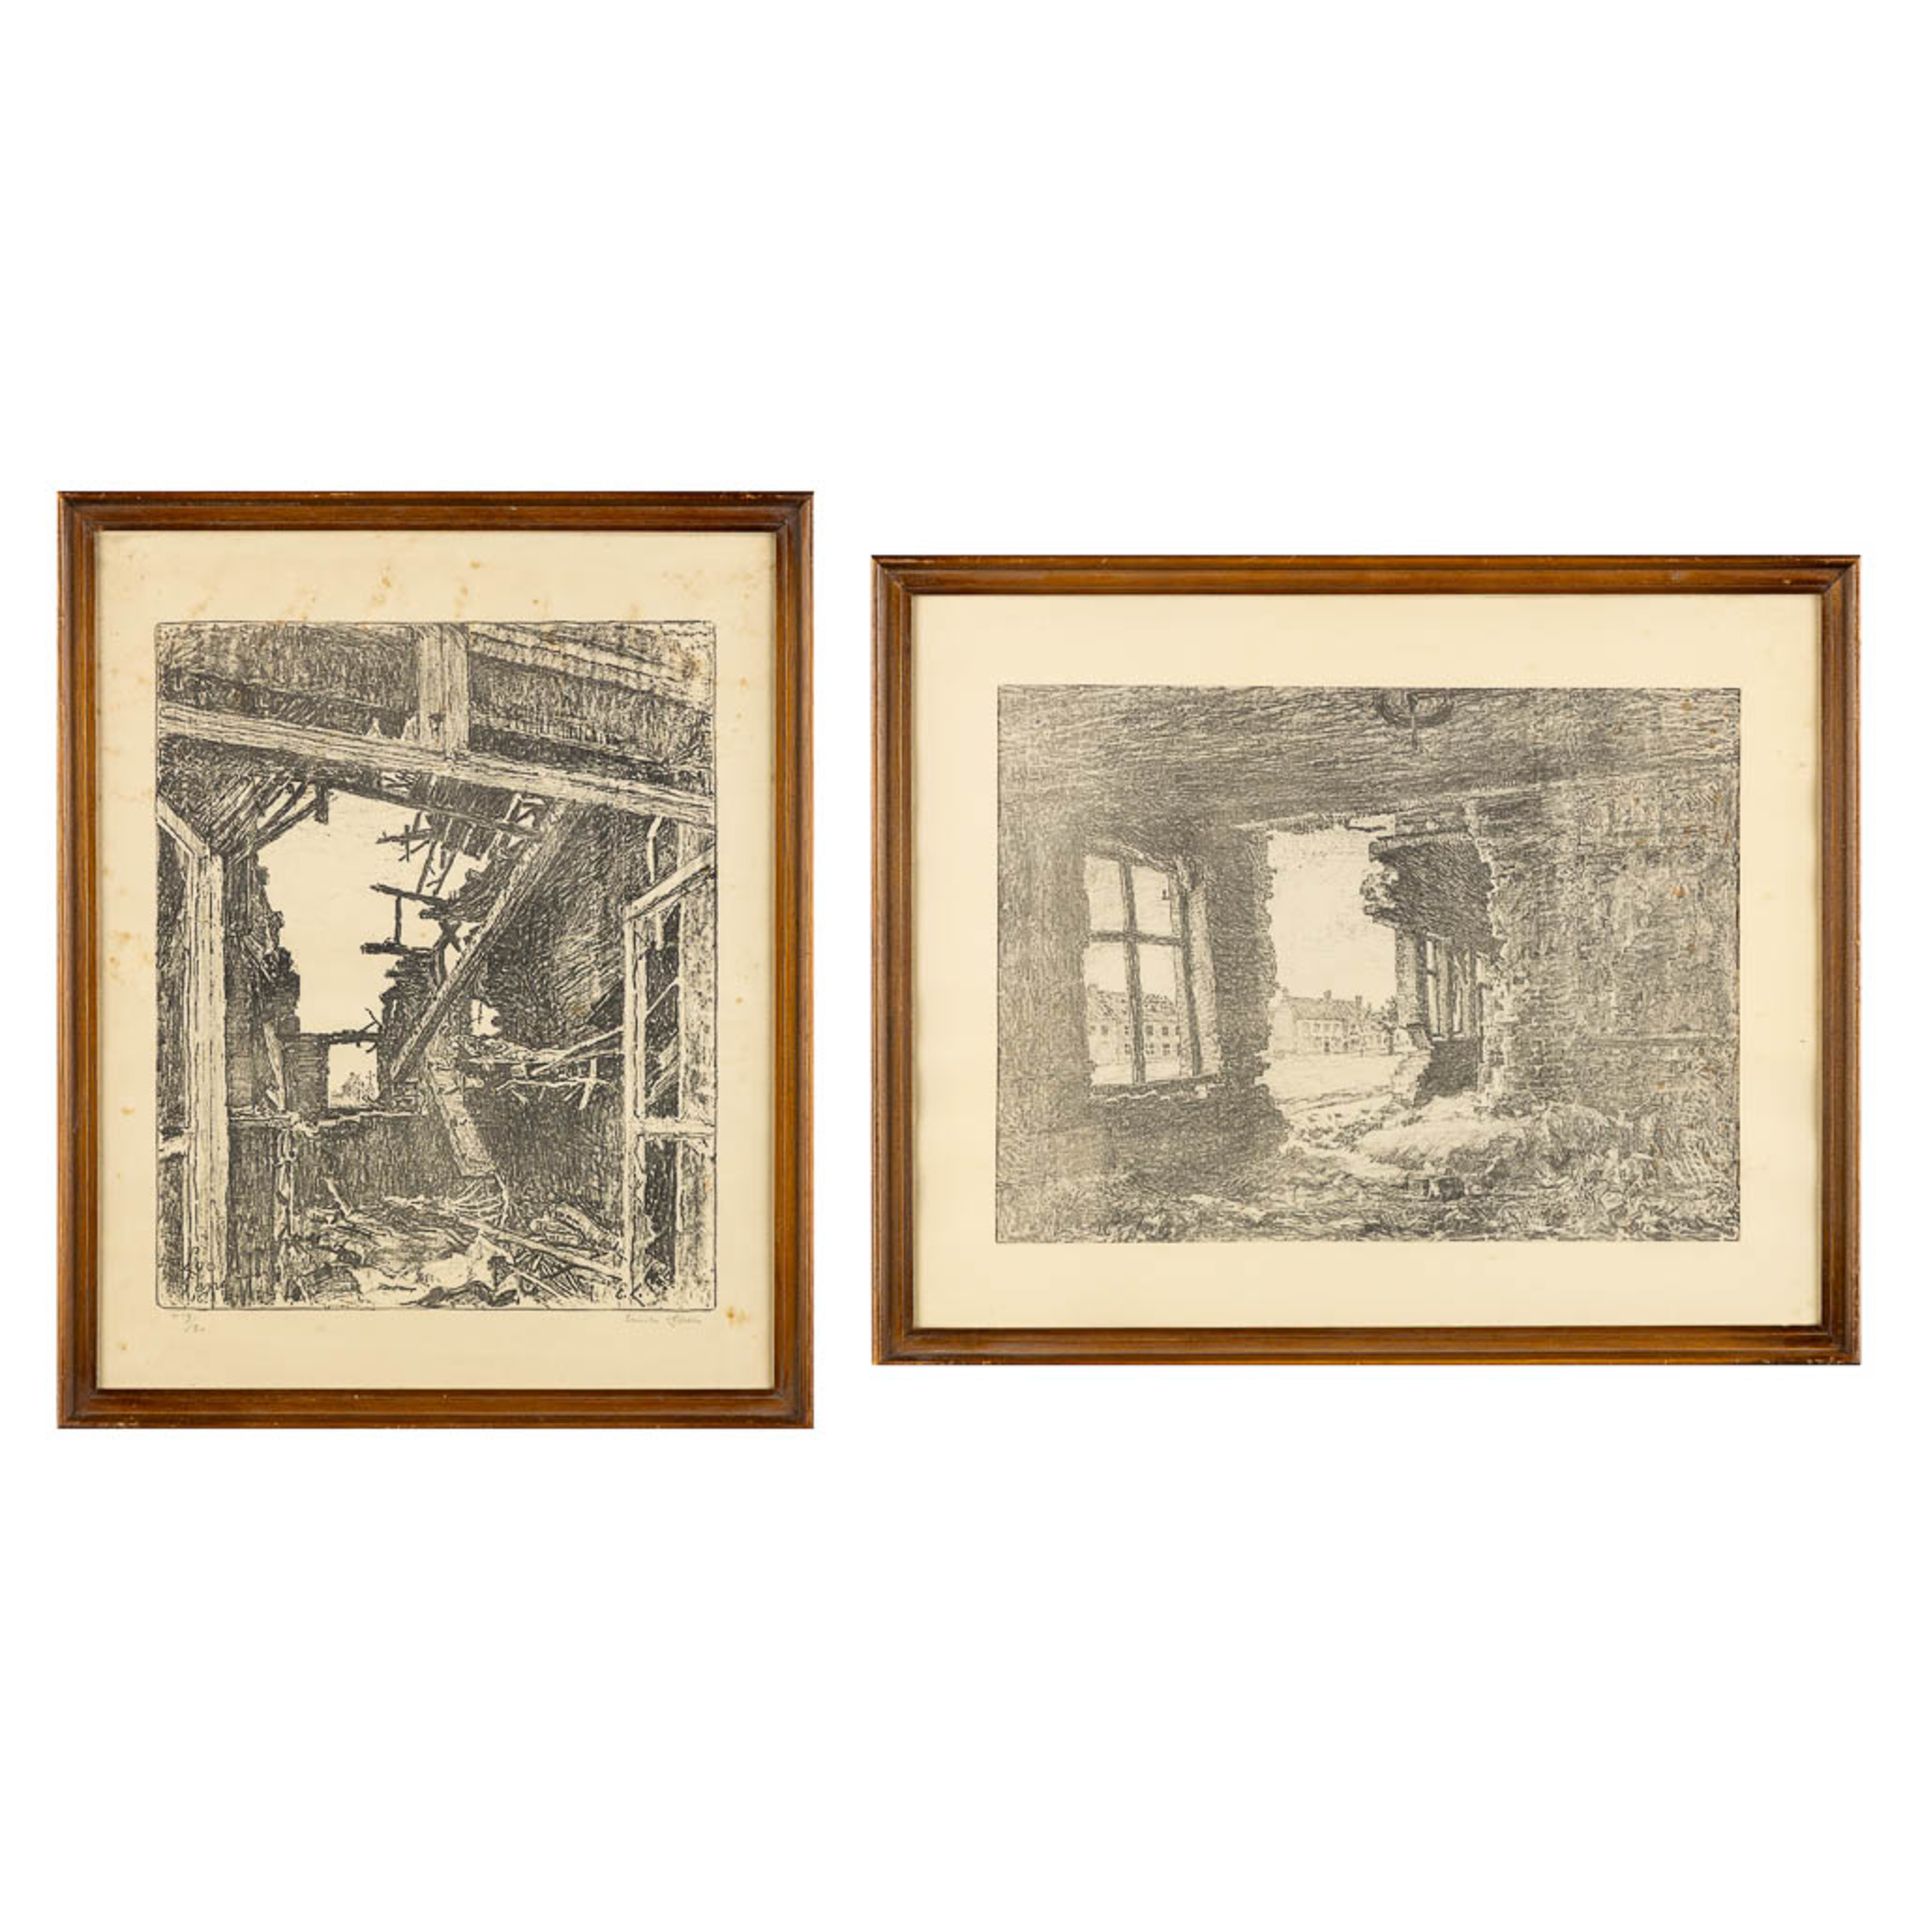 Emile CLAUS (1849-1924) 'Loo Sept, 1916' Two Lithographs. (W:42 x H:31,5 cm)